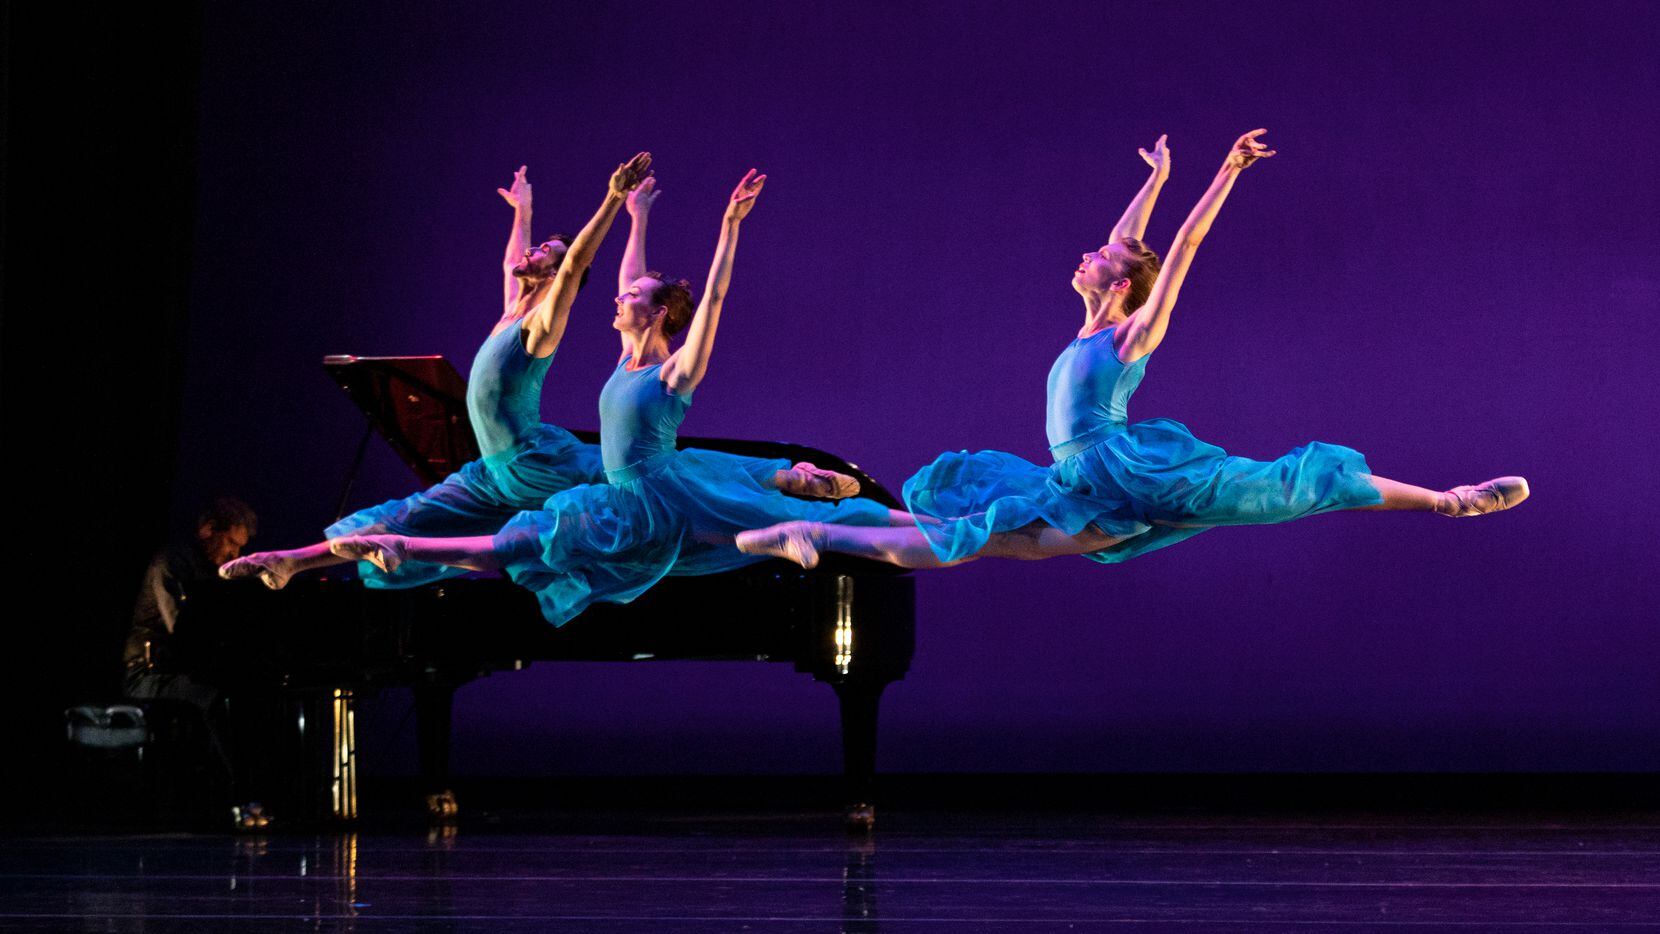 Three female ballet dancers leap across the stage.